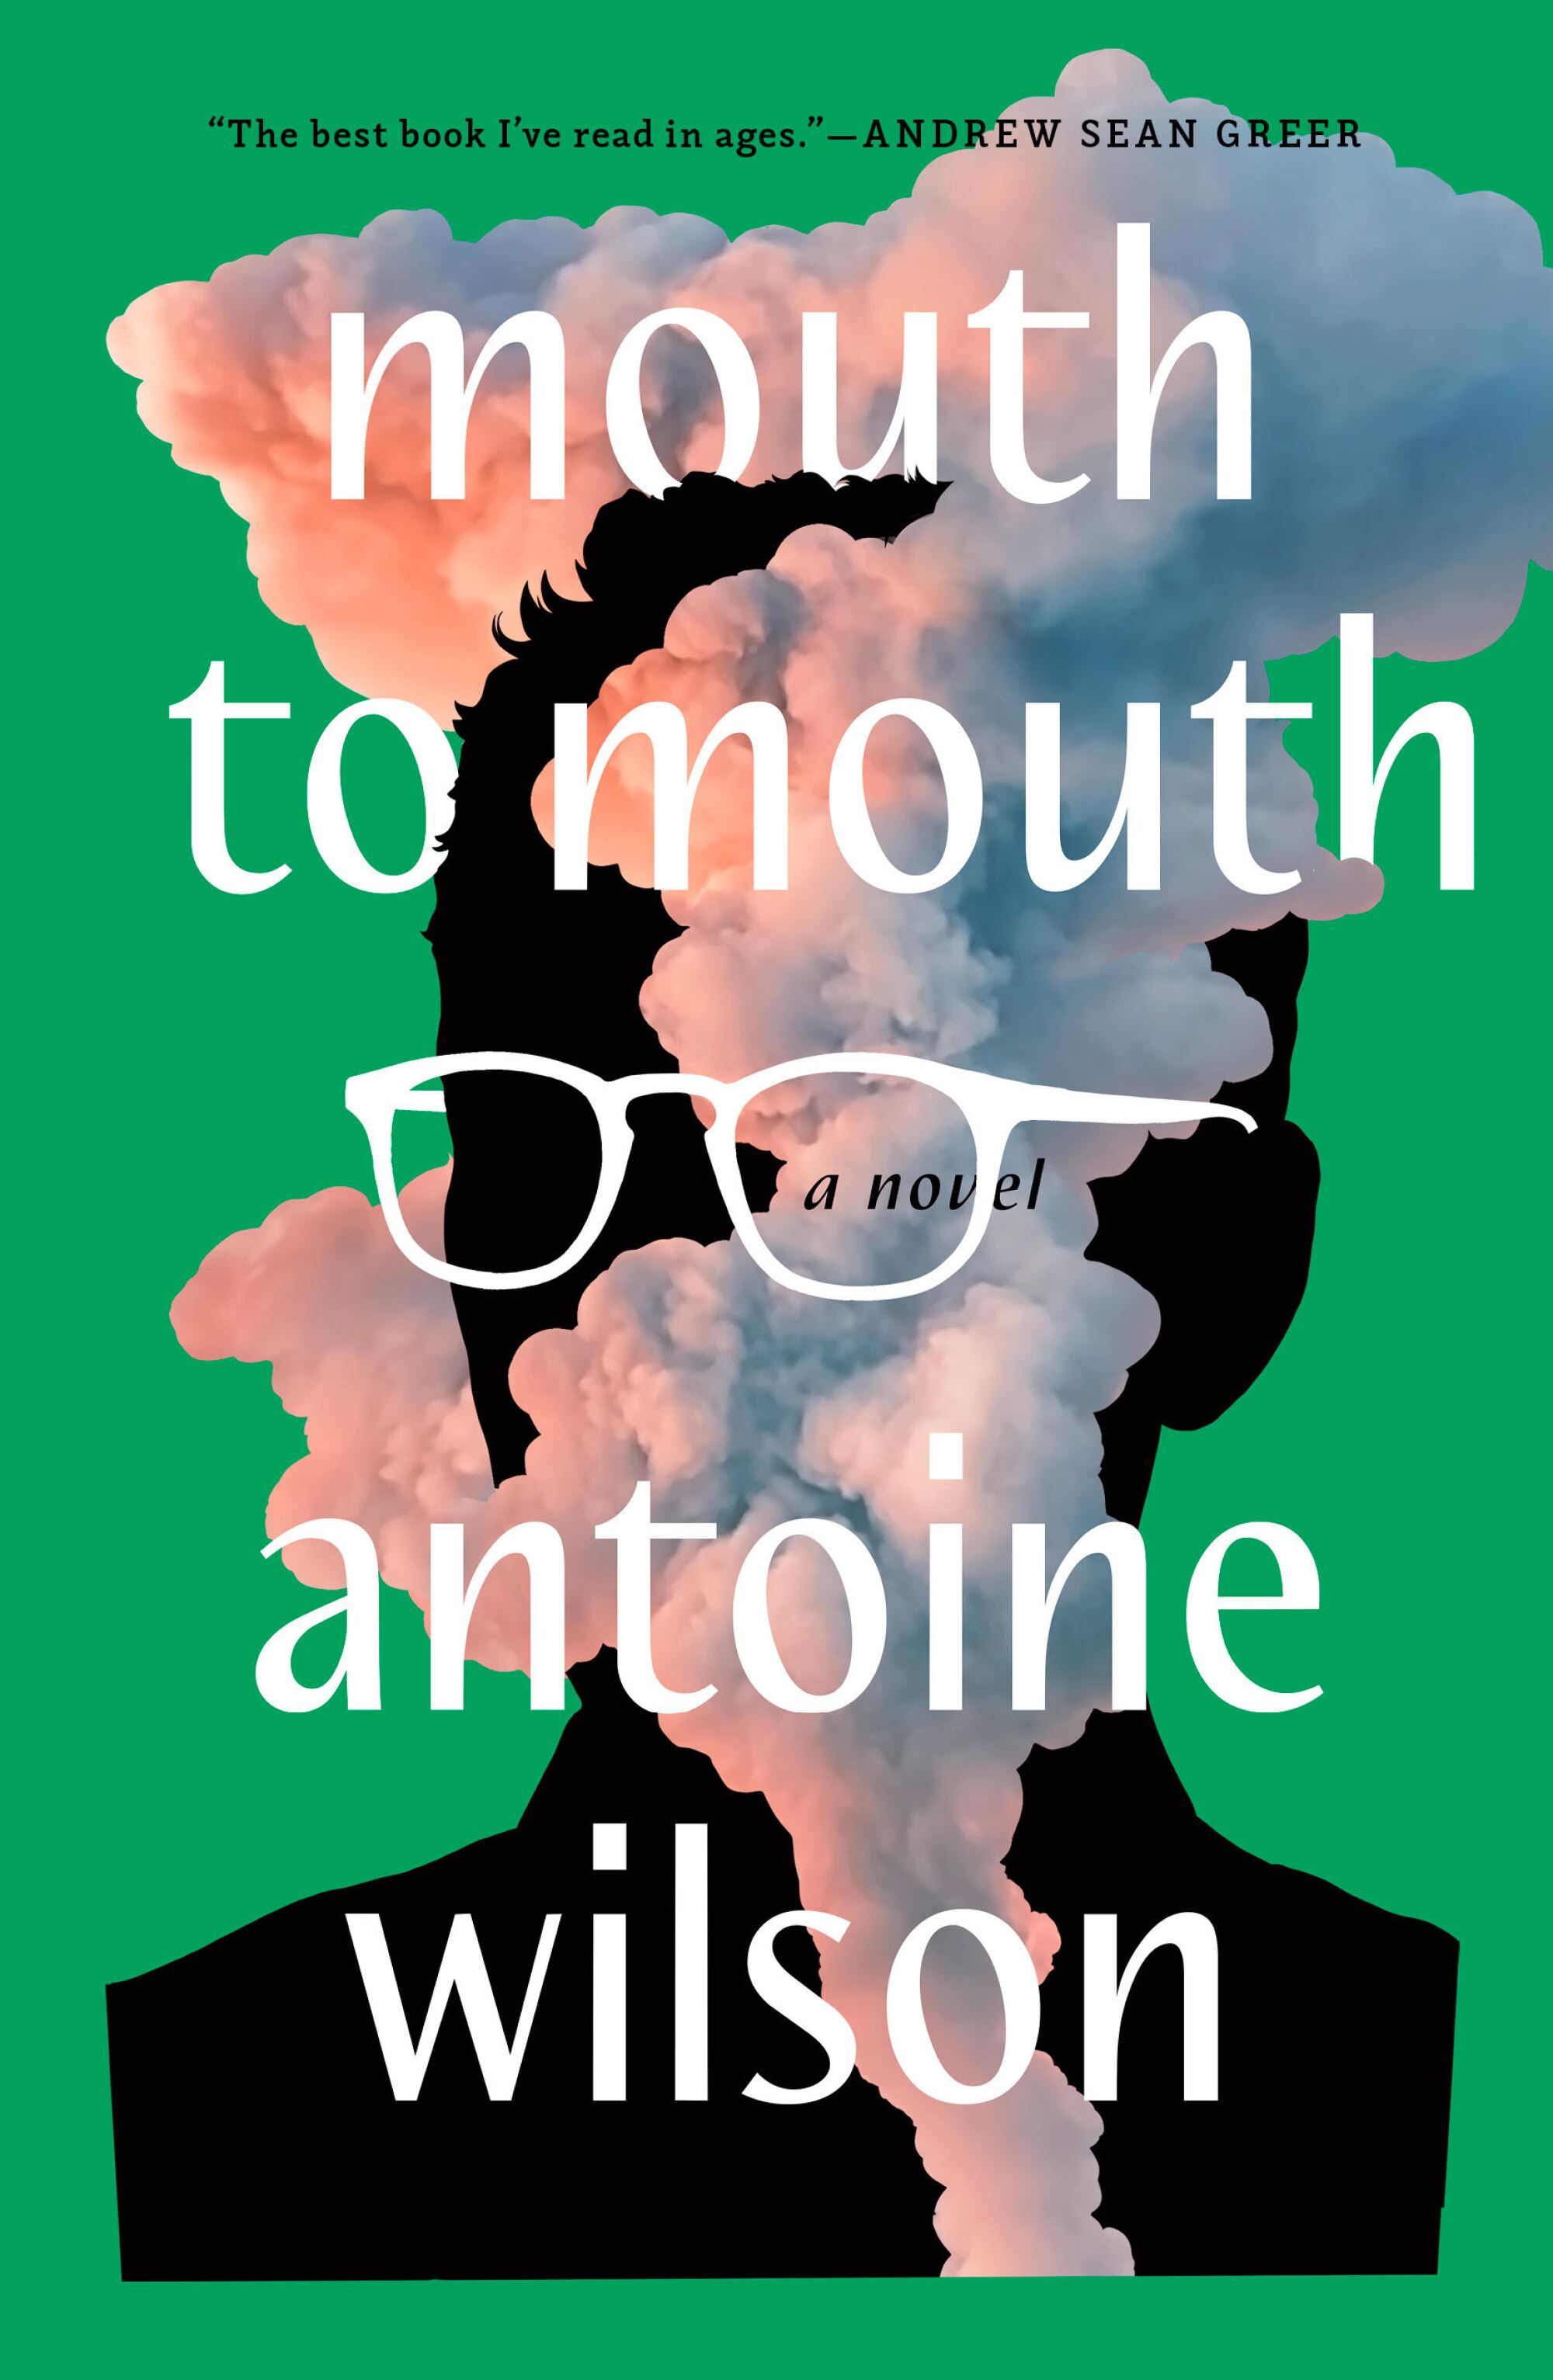 Clouds on a black silhouette wearing white glasses on cover of "Mouth to Mouth," by Antoine Wilson